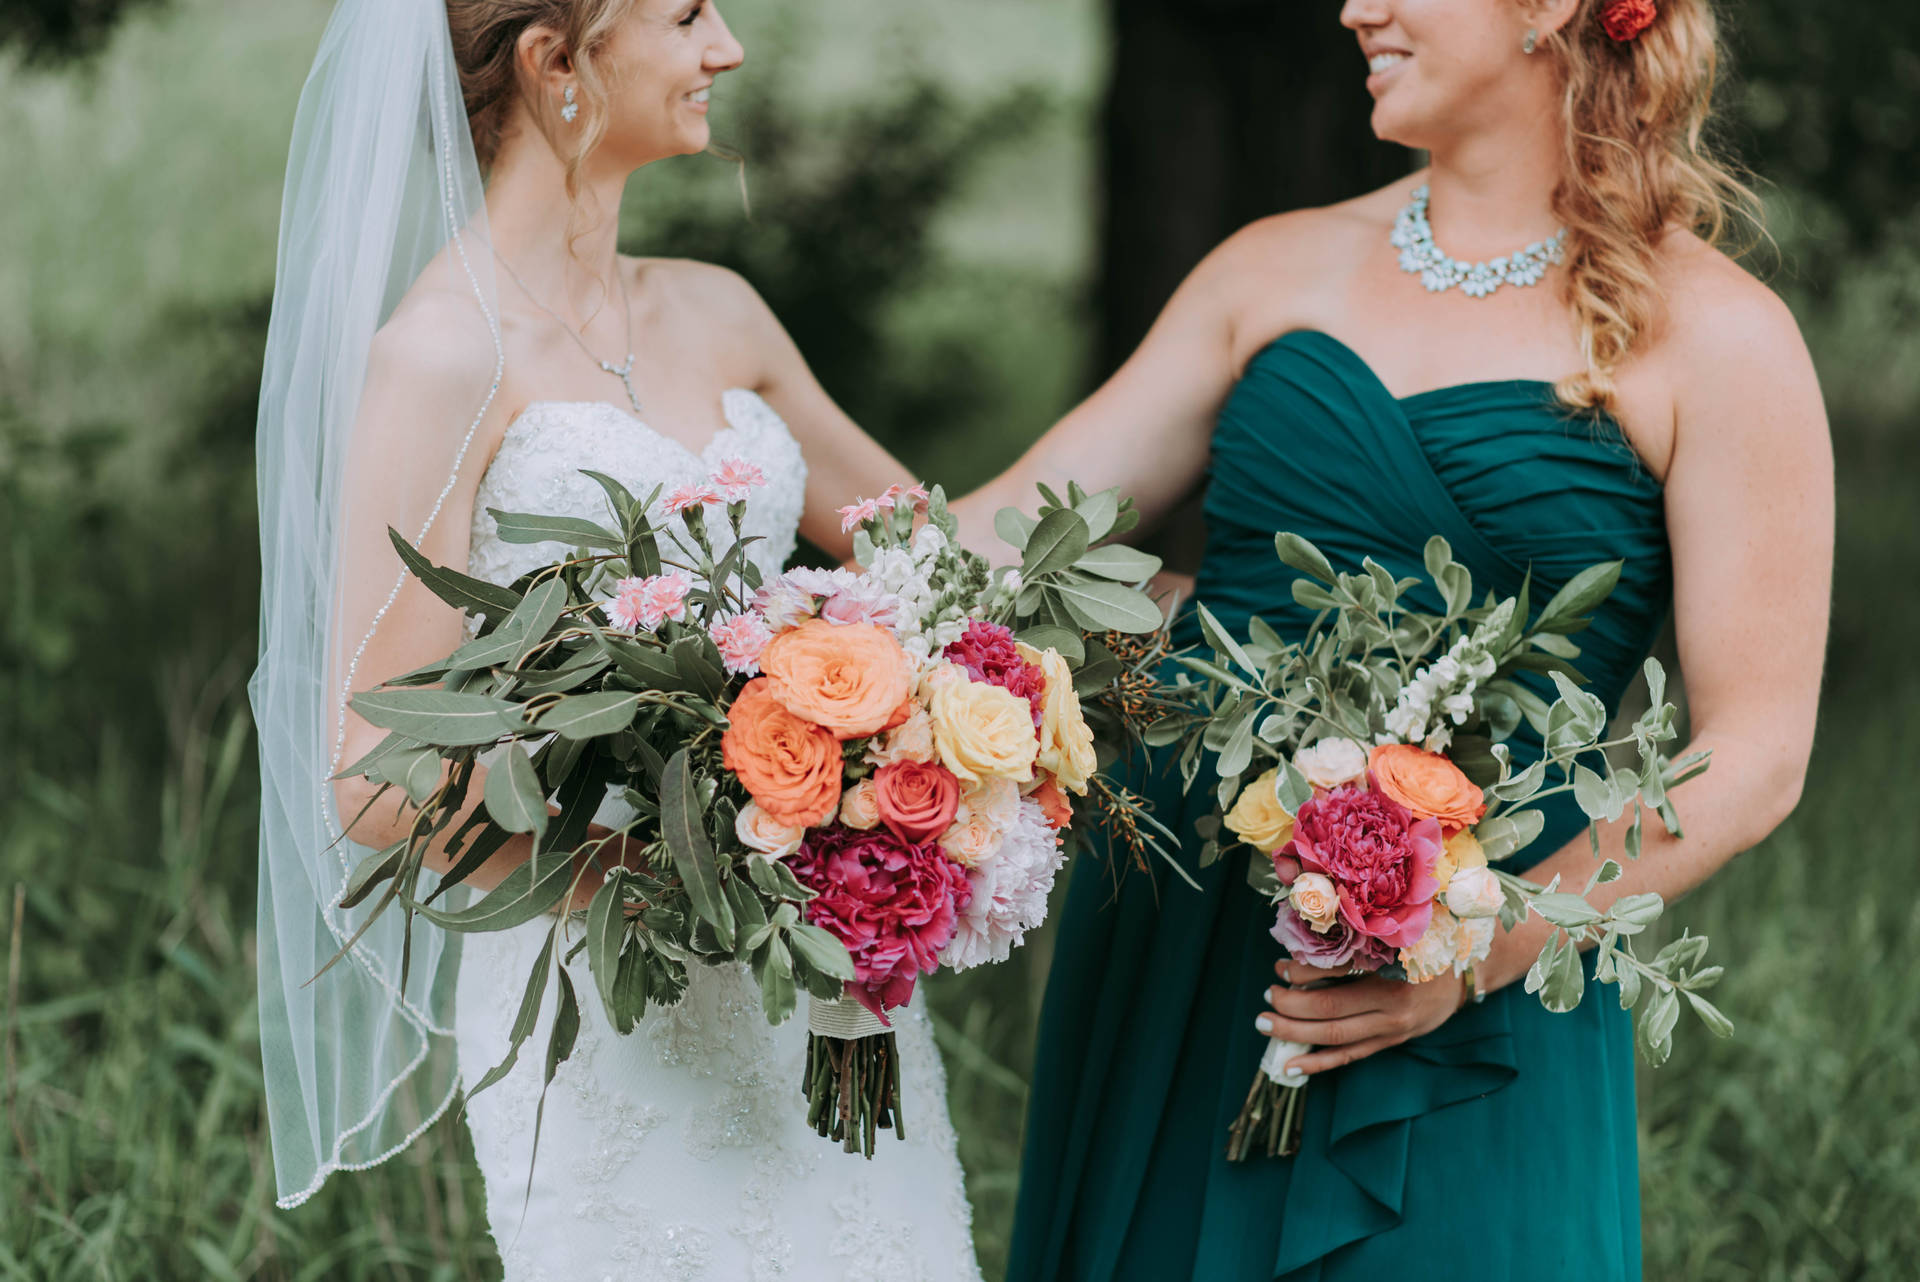 Bride And Bridesmaid With Flowers Background